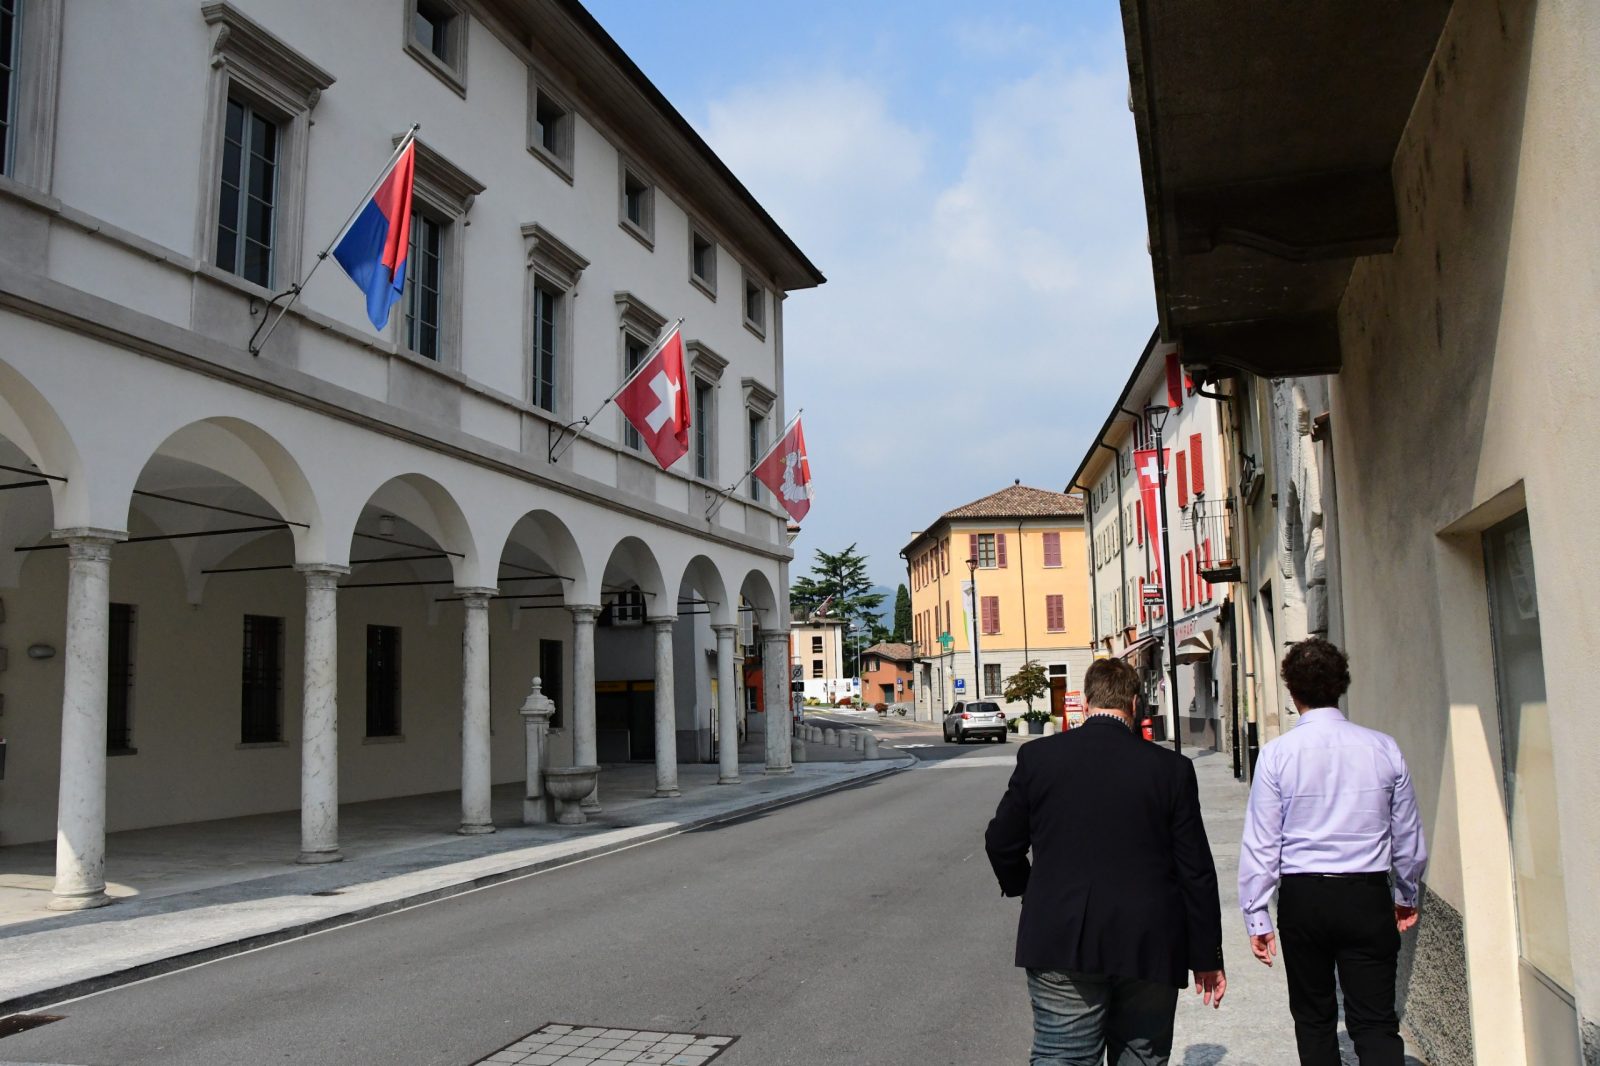 Dr. Scott Nelson and Dr. Yannis Stivachtis on a walk through town, Fall 2018, Riva San Vitale, Switzerland